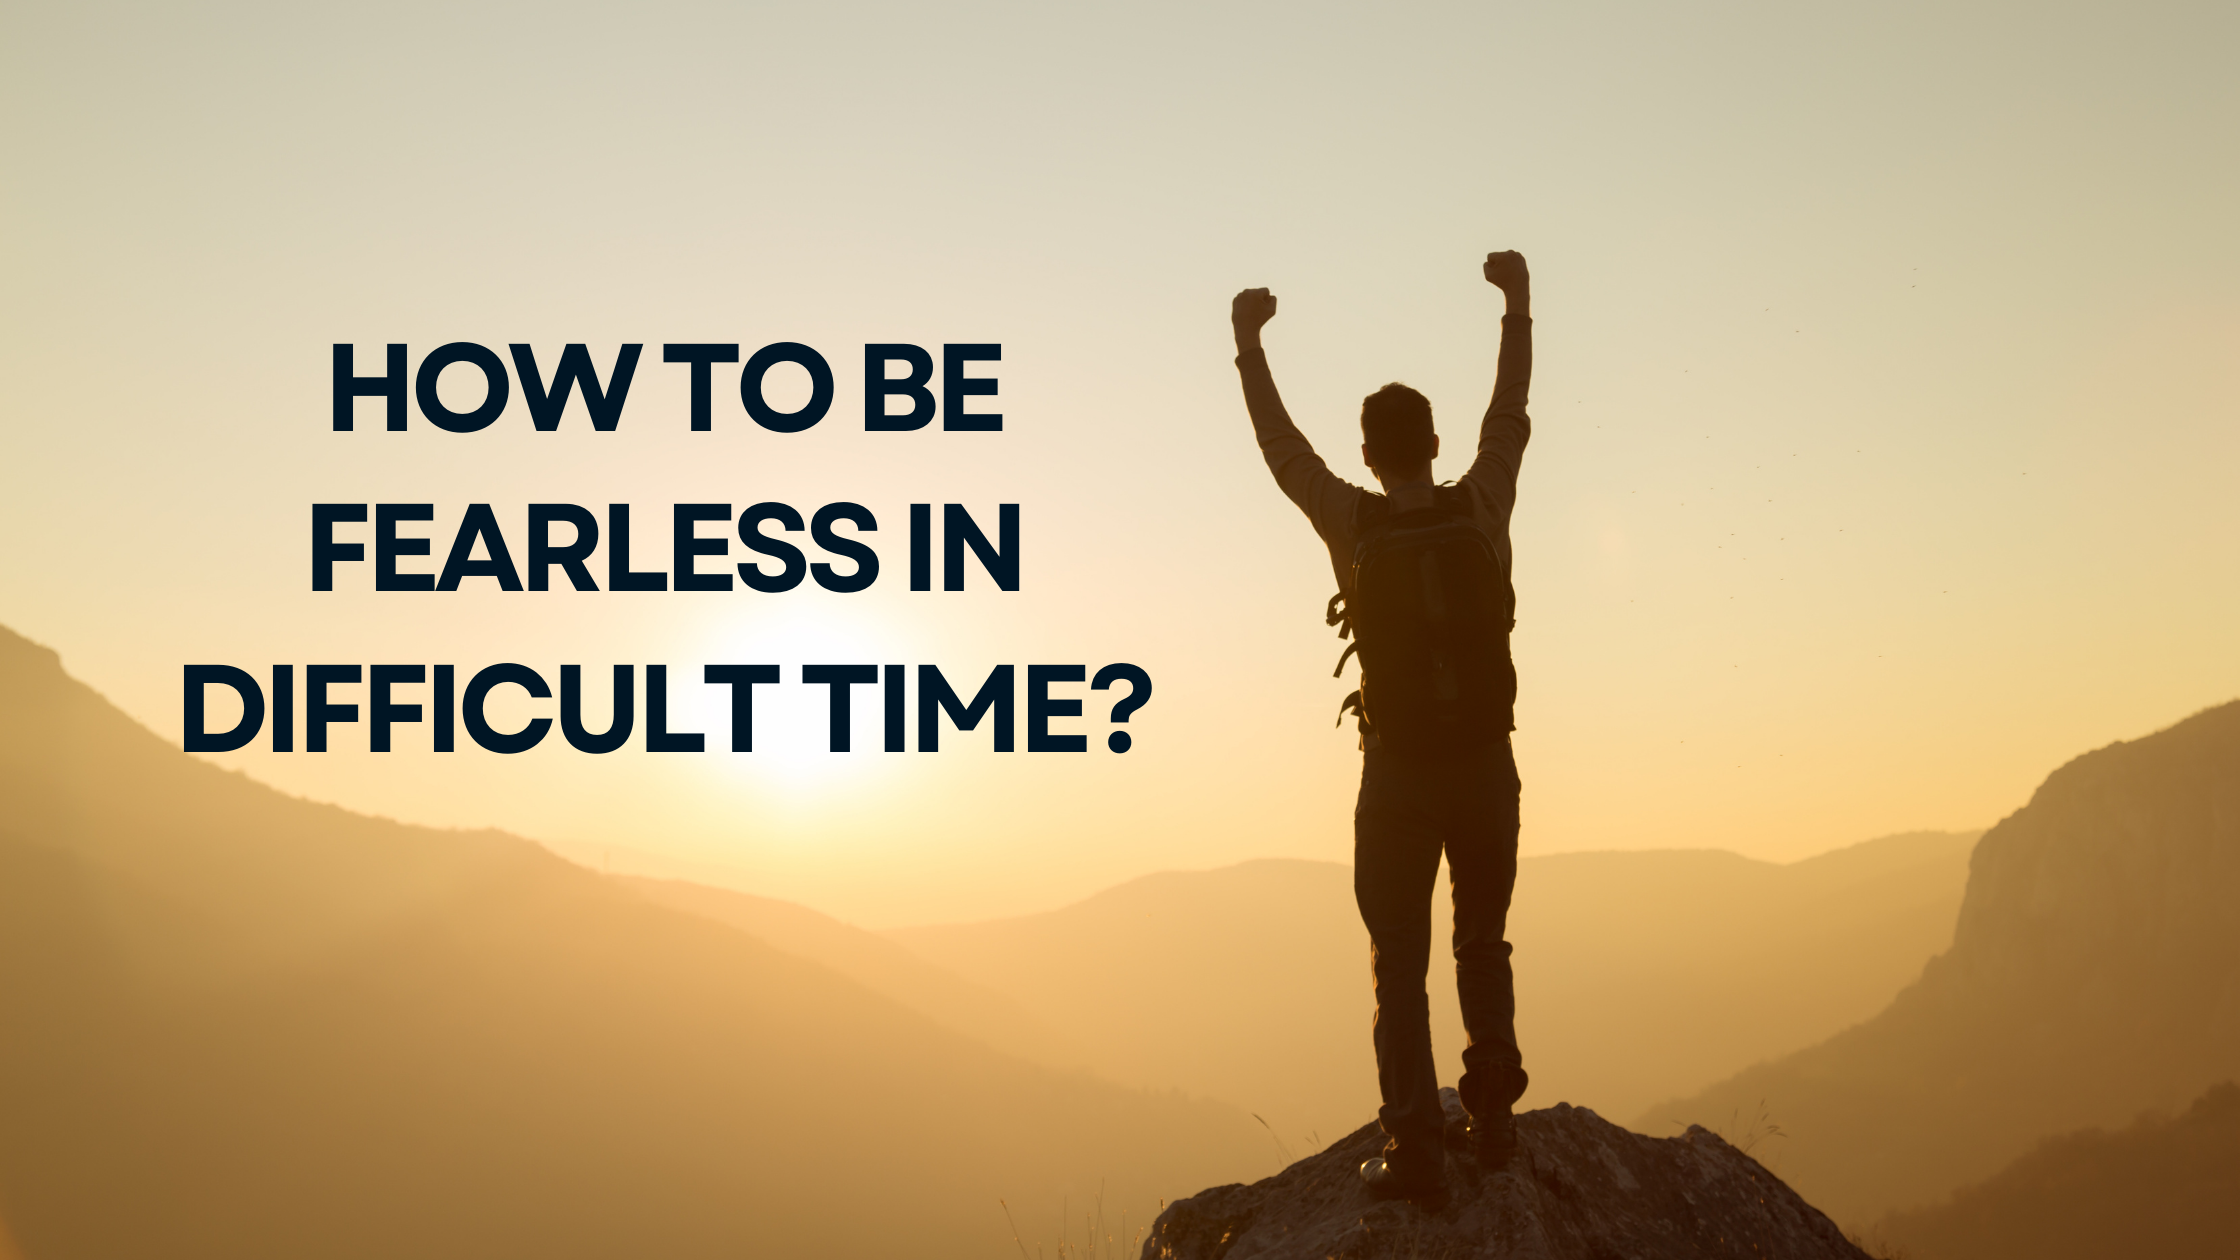 How to Be Fearless in Difficult Time